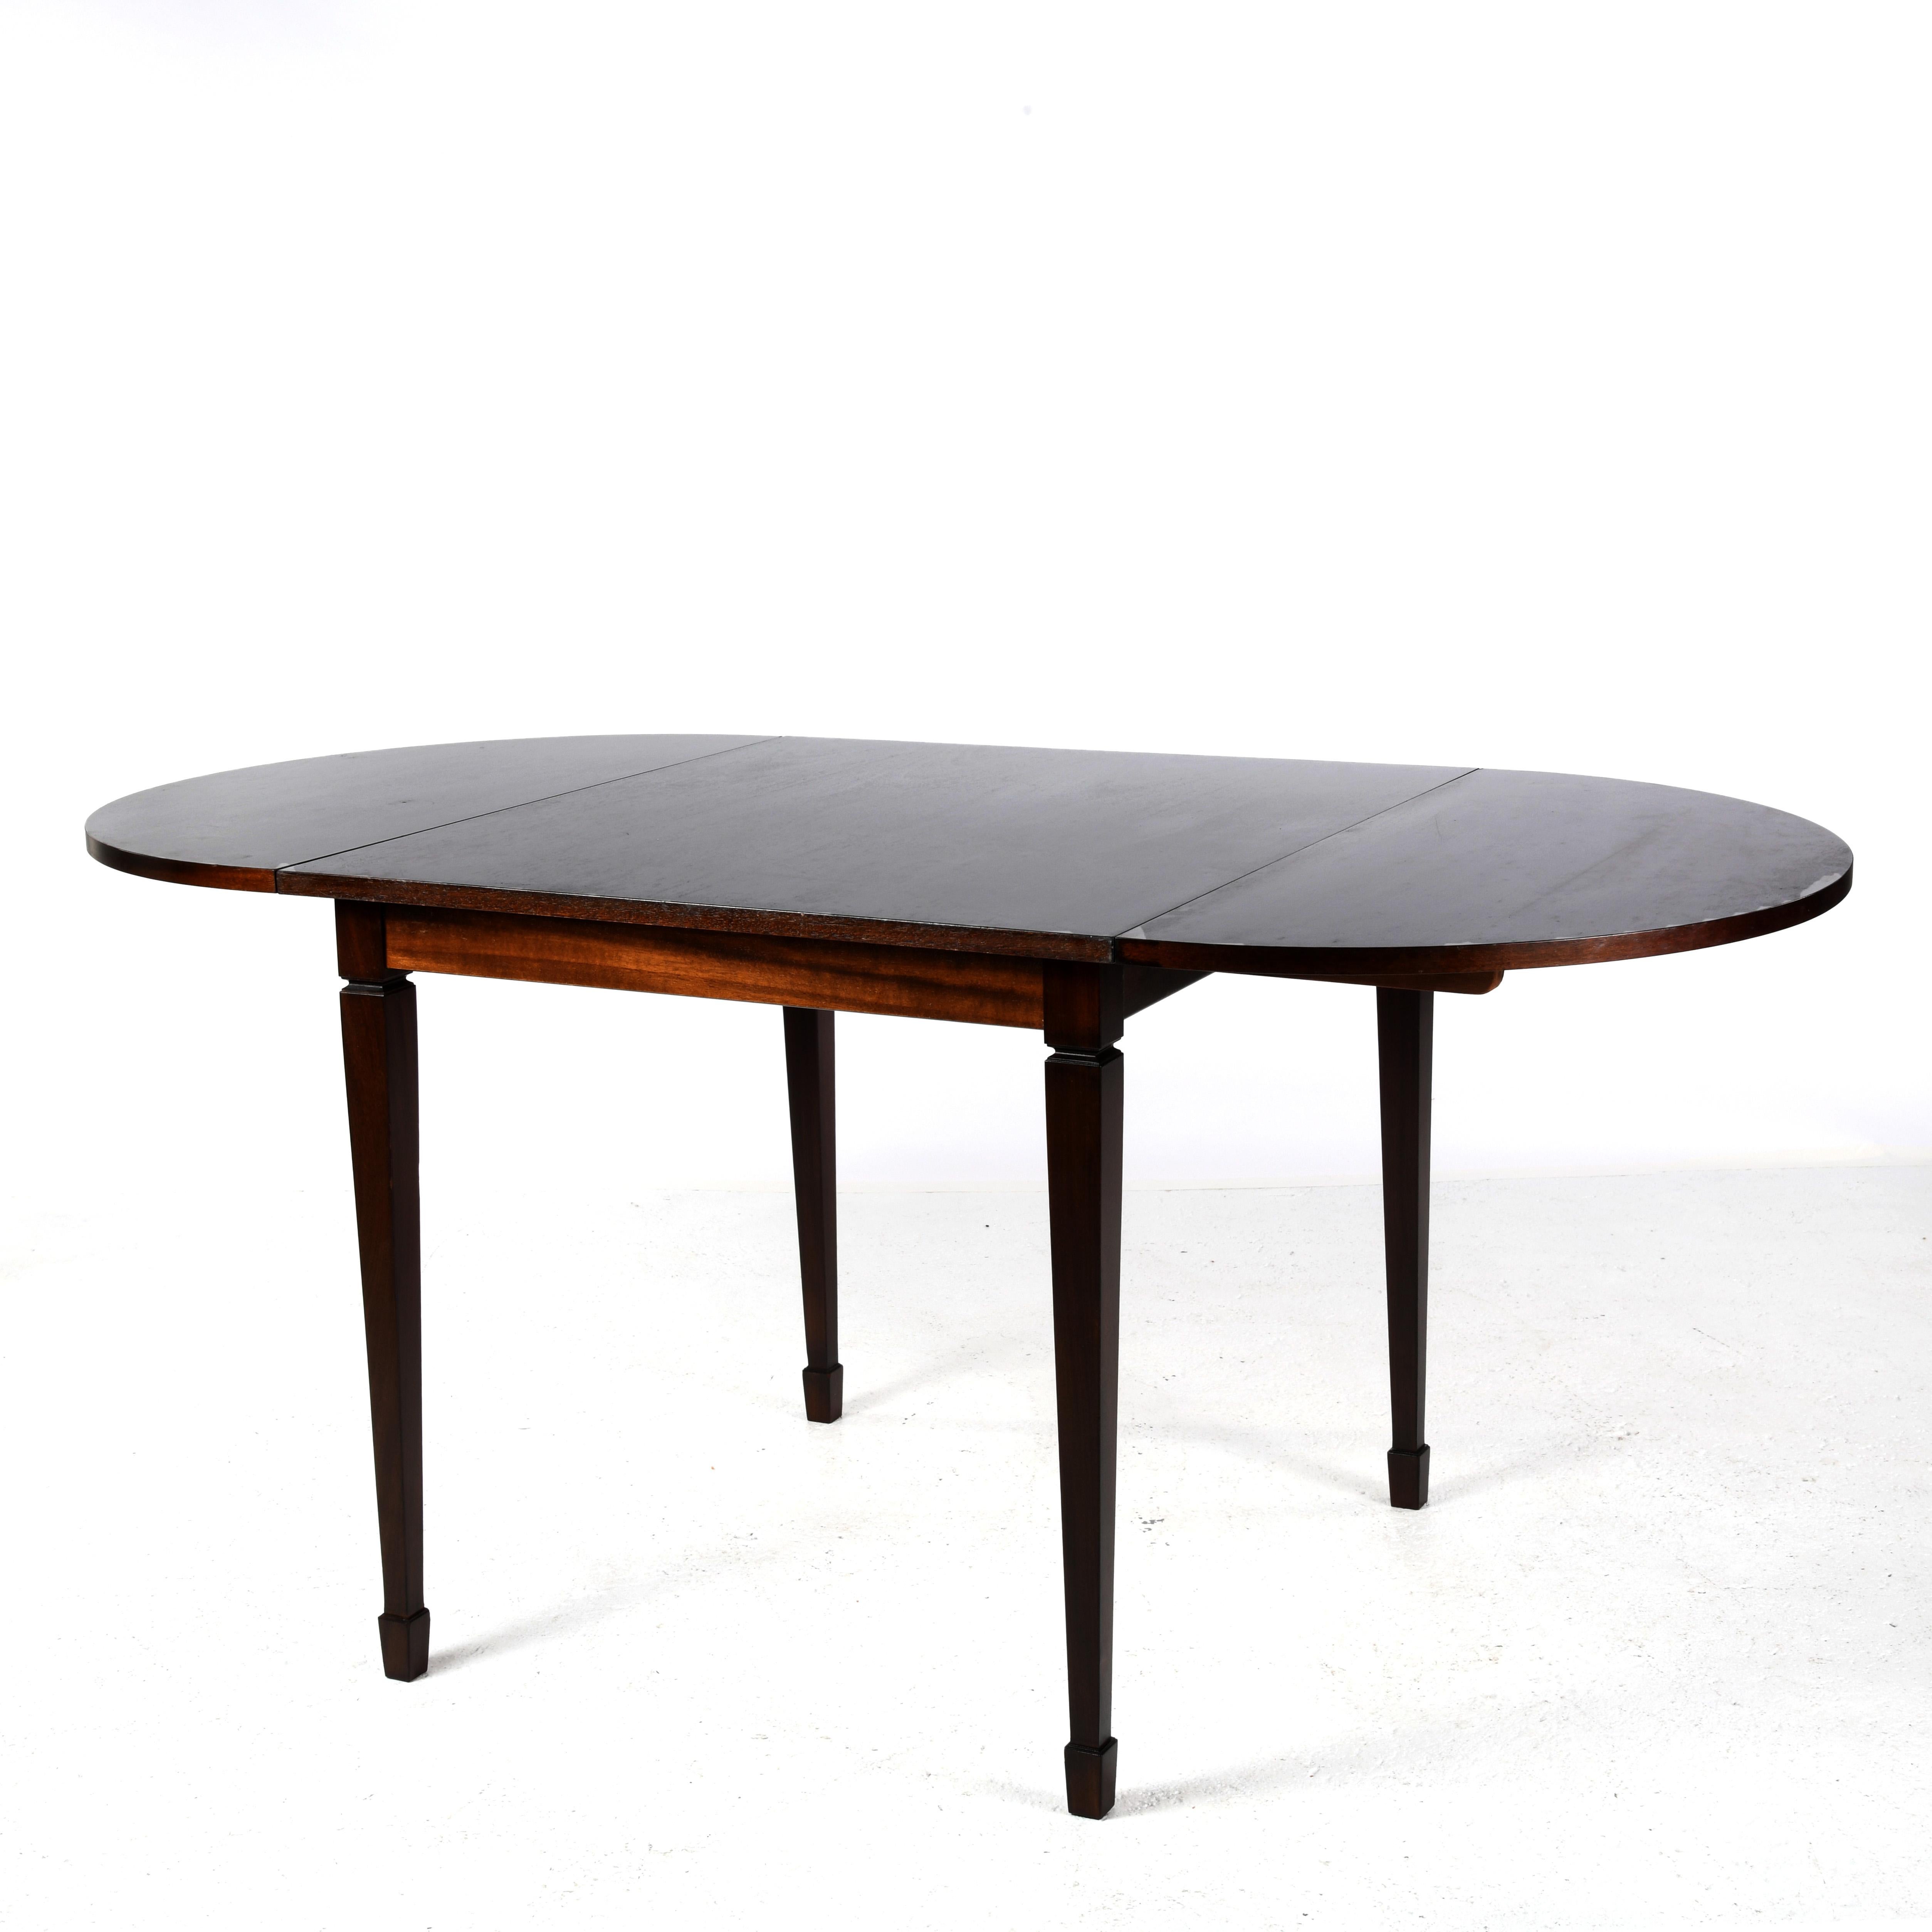 Small square table in stained wood from Denmark. Two removable semi-circular leaves can be folded down to form an oval table. They can be folded away to the sides or removed completely. Tapered legs finished with shoes. Sliders under the central